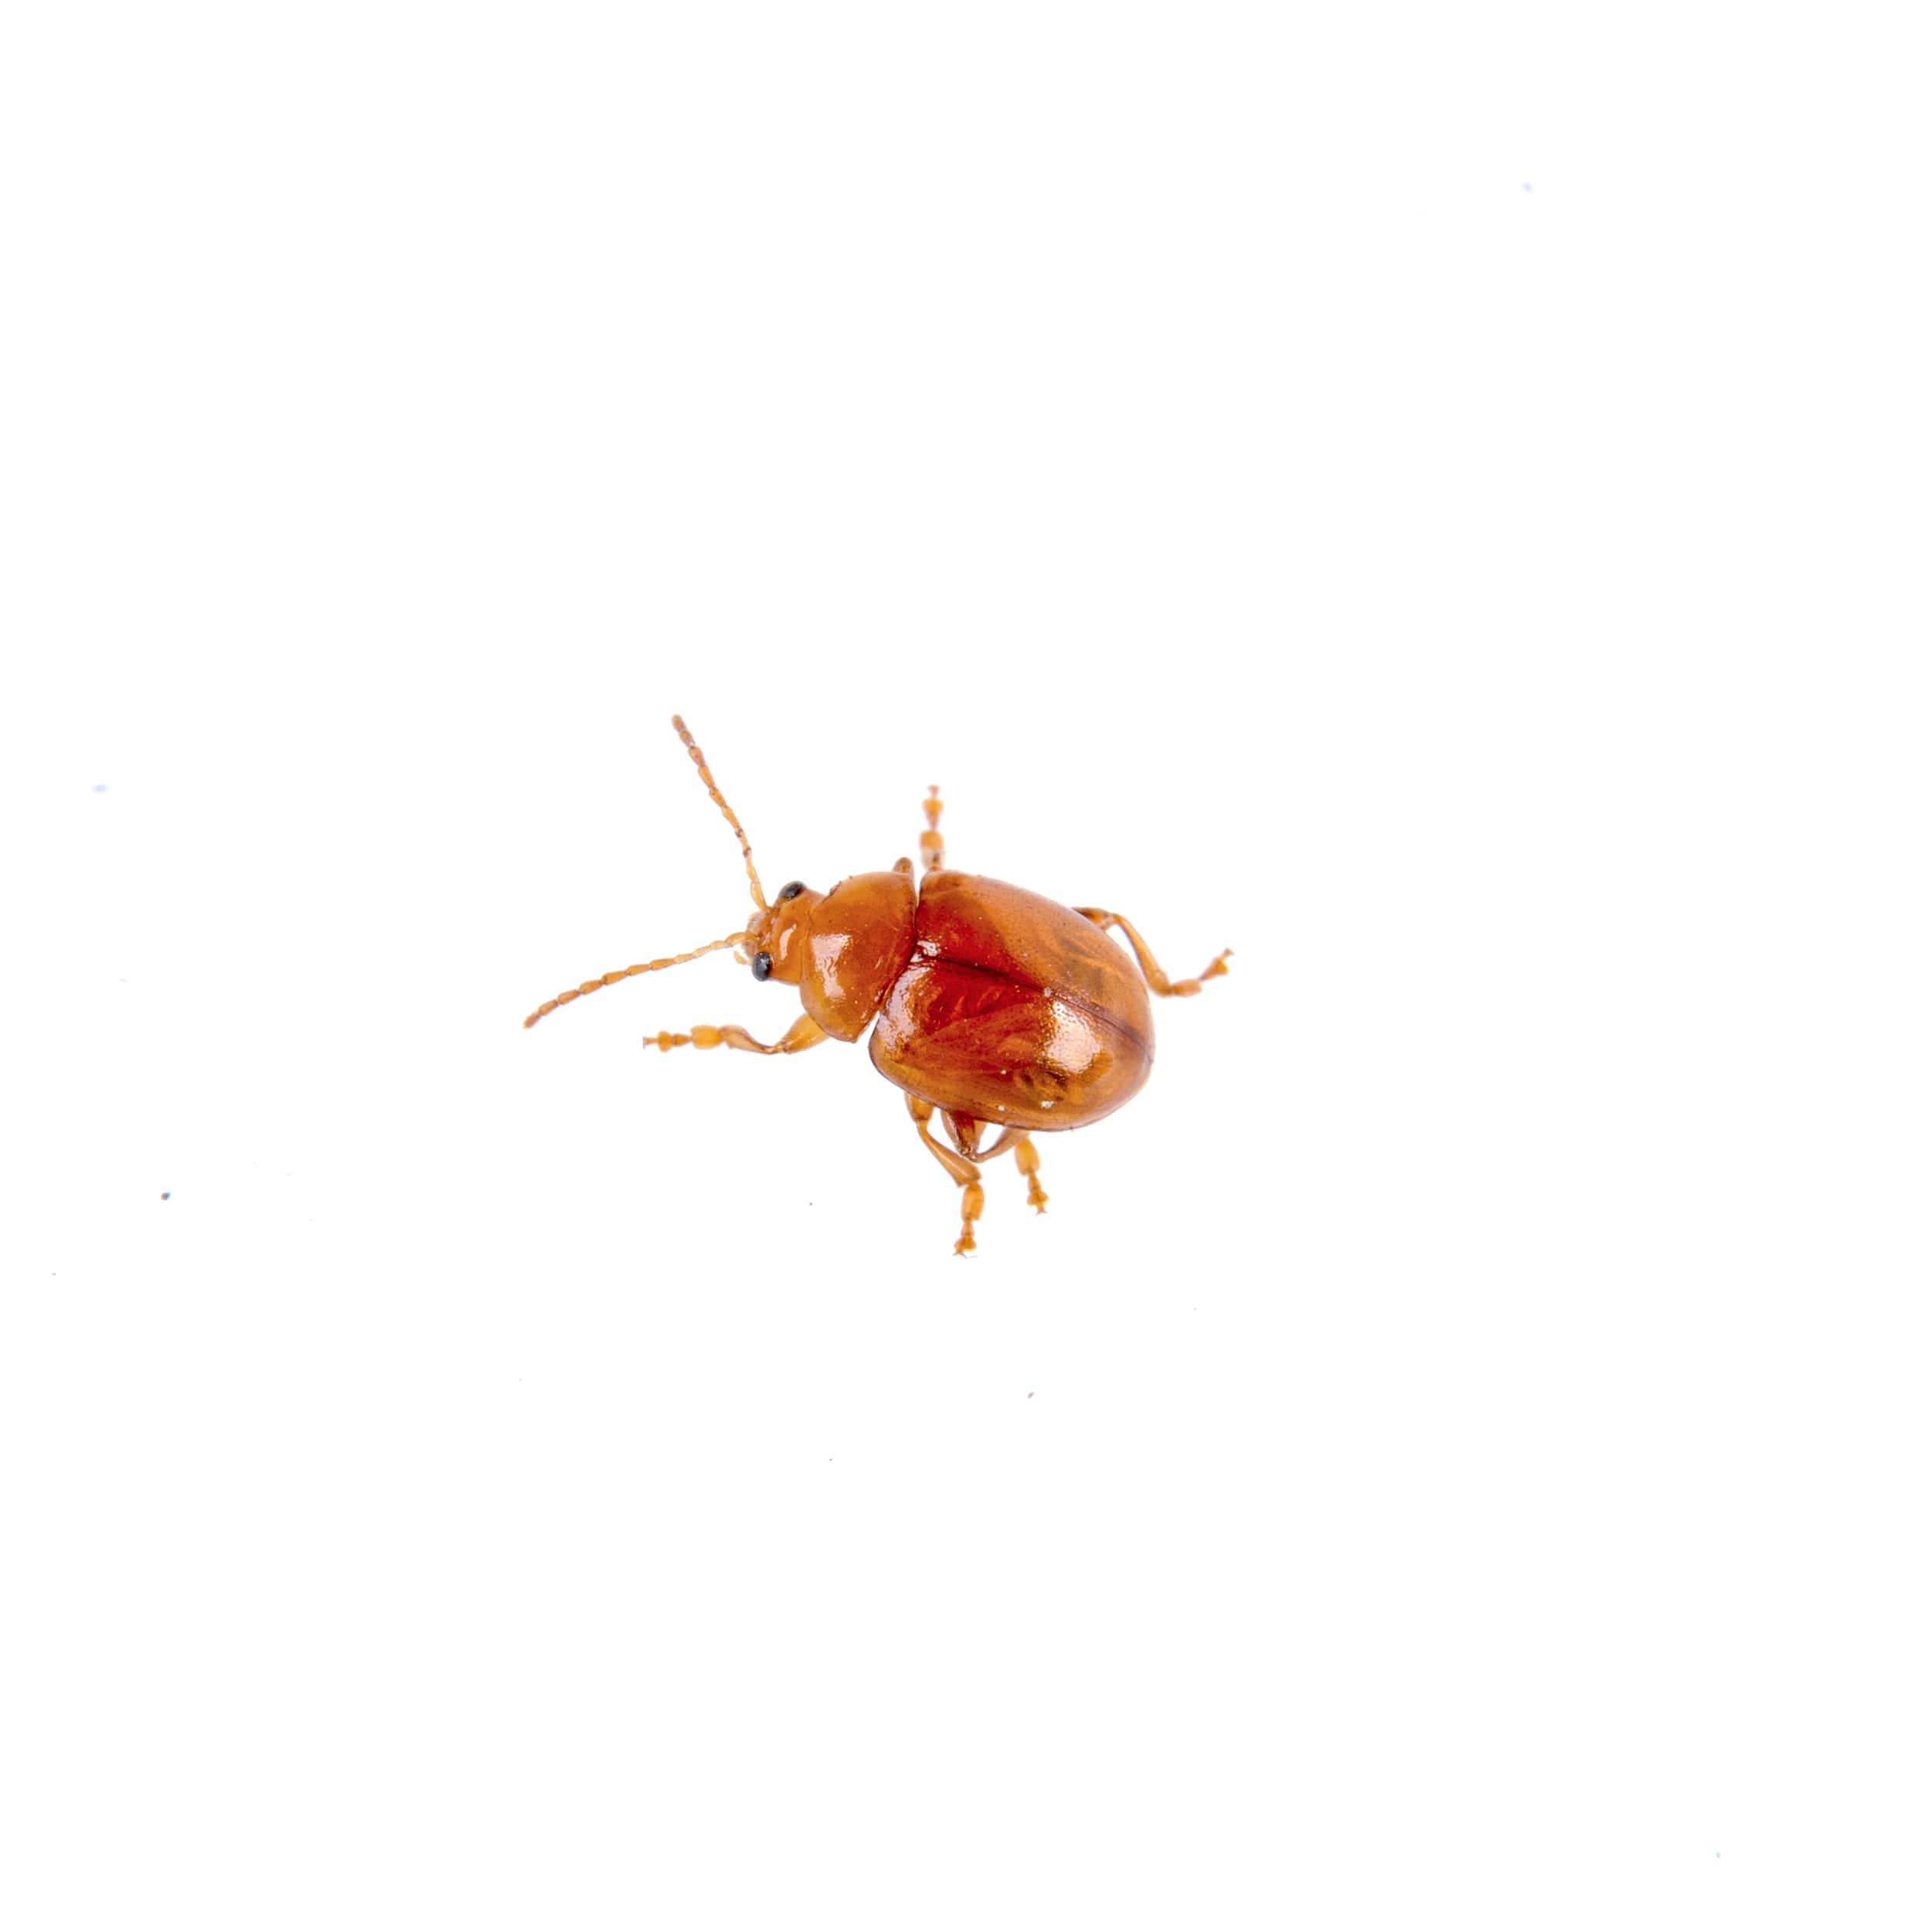 rusty-beetle-on-a-white-background-min